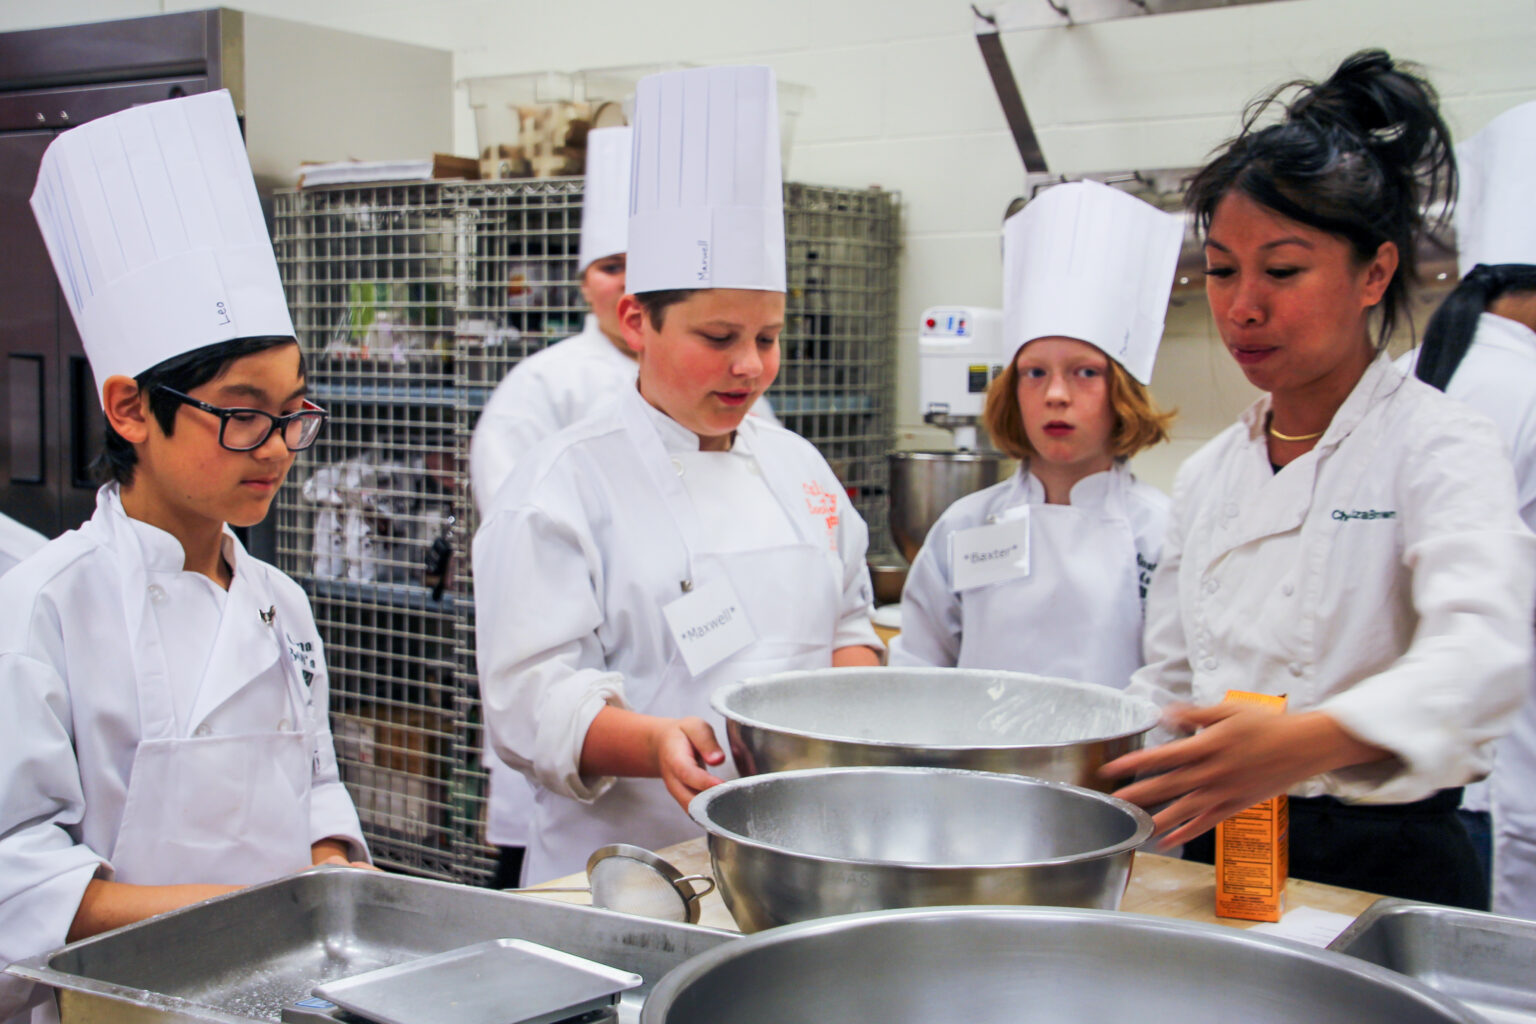 From camper to junior chef, UAA’s Culinary Boot Camp teaches kids basic